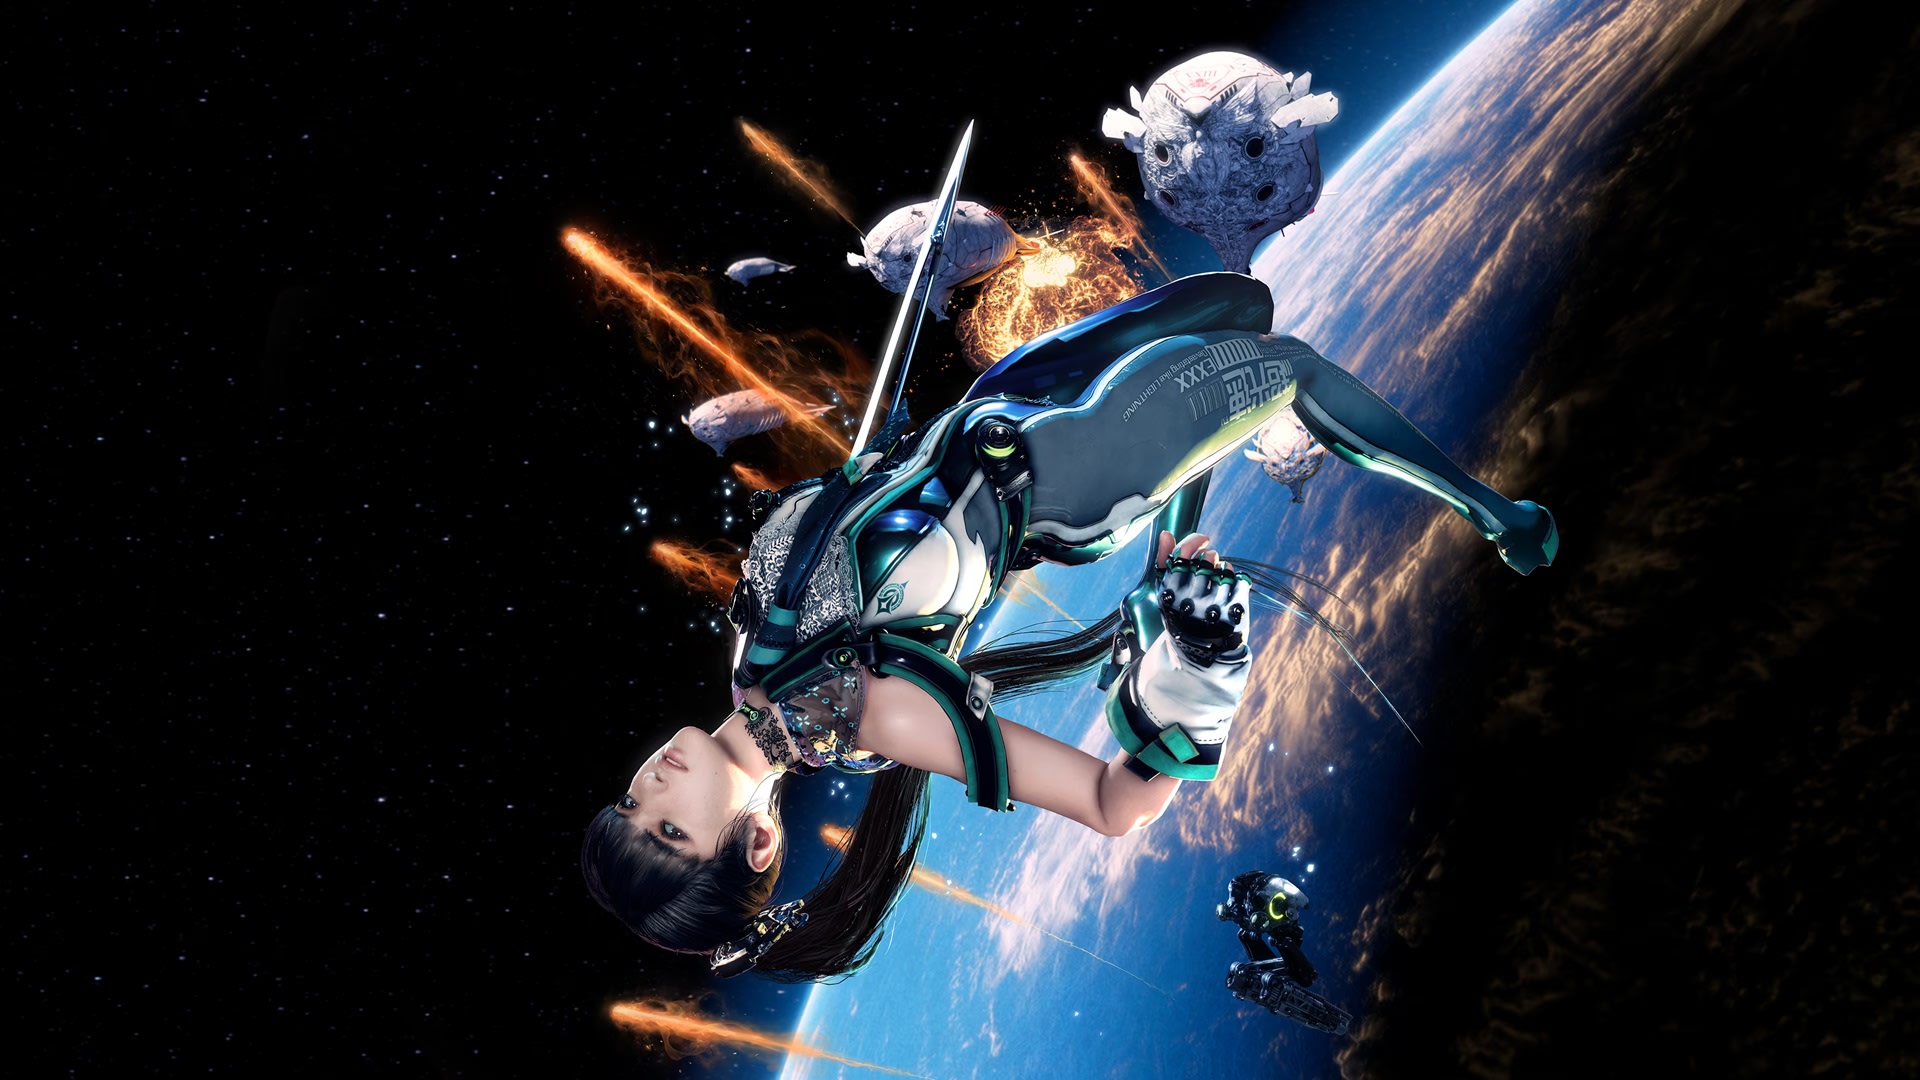 Stellar Blade artwork showing an attractive Asian woman floating in space.